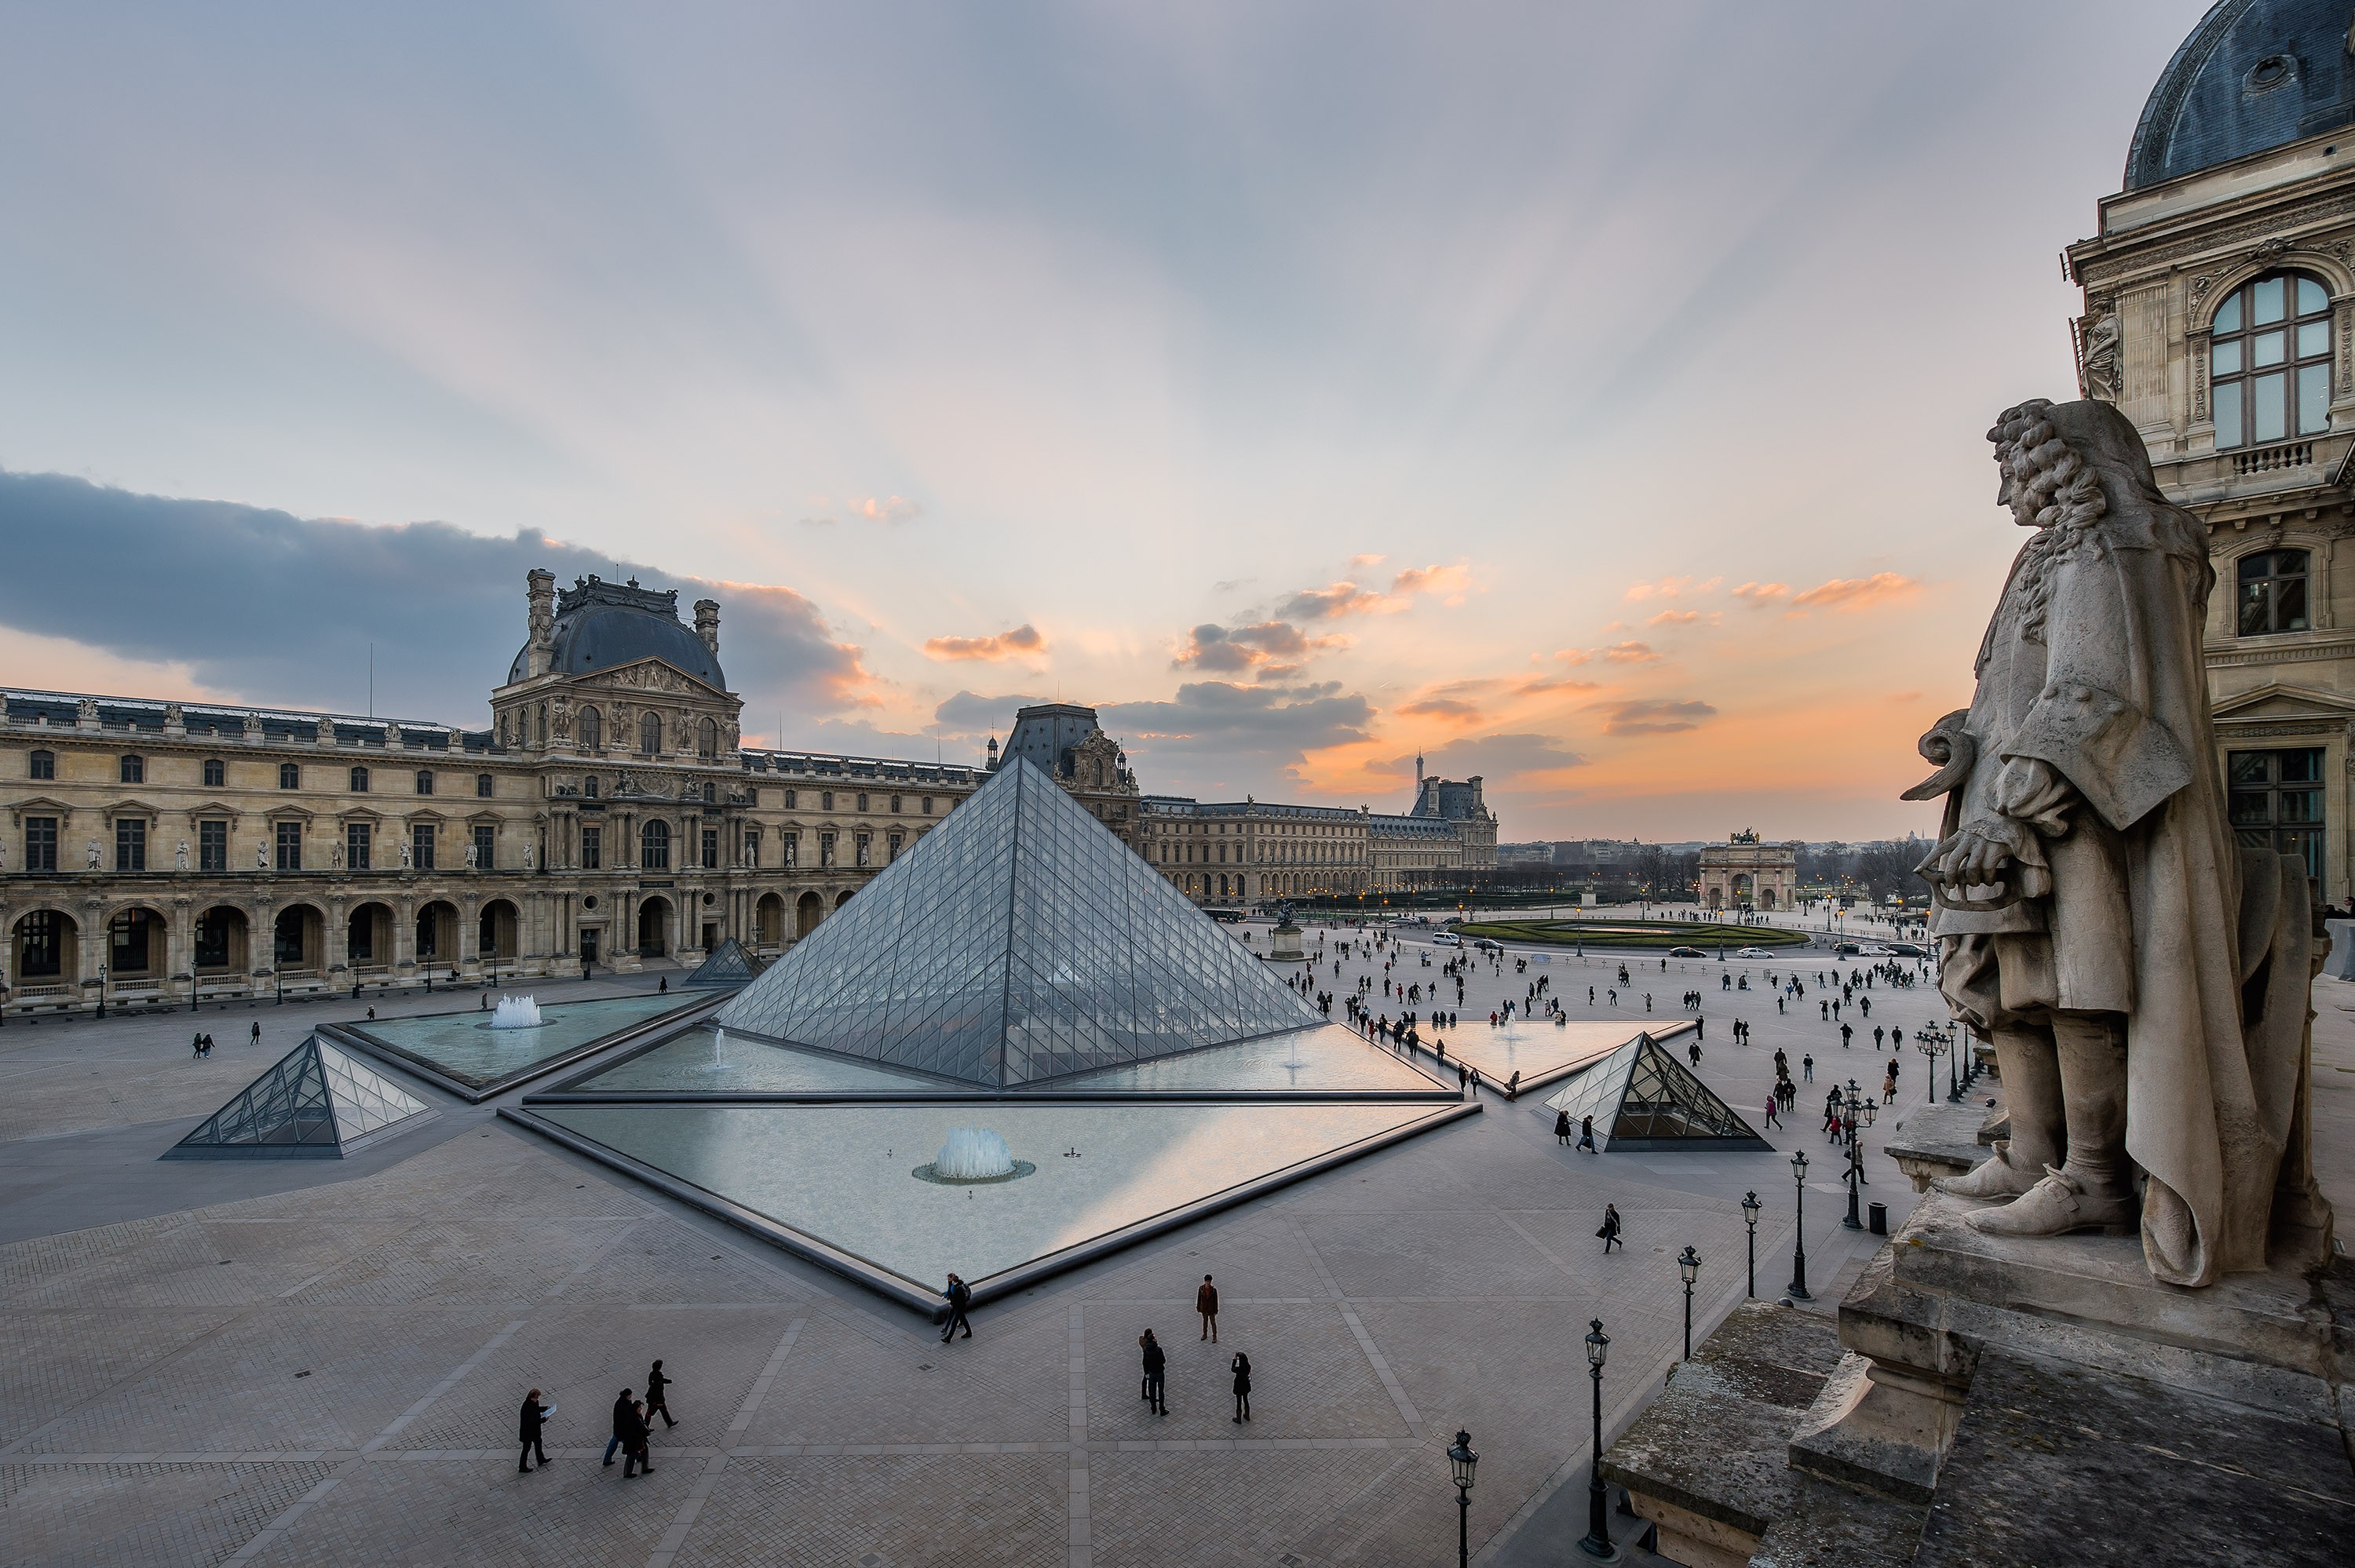 Outside view of The Louvre Museum in France